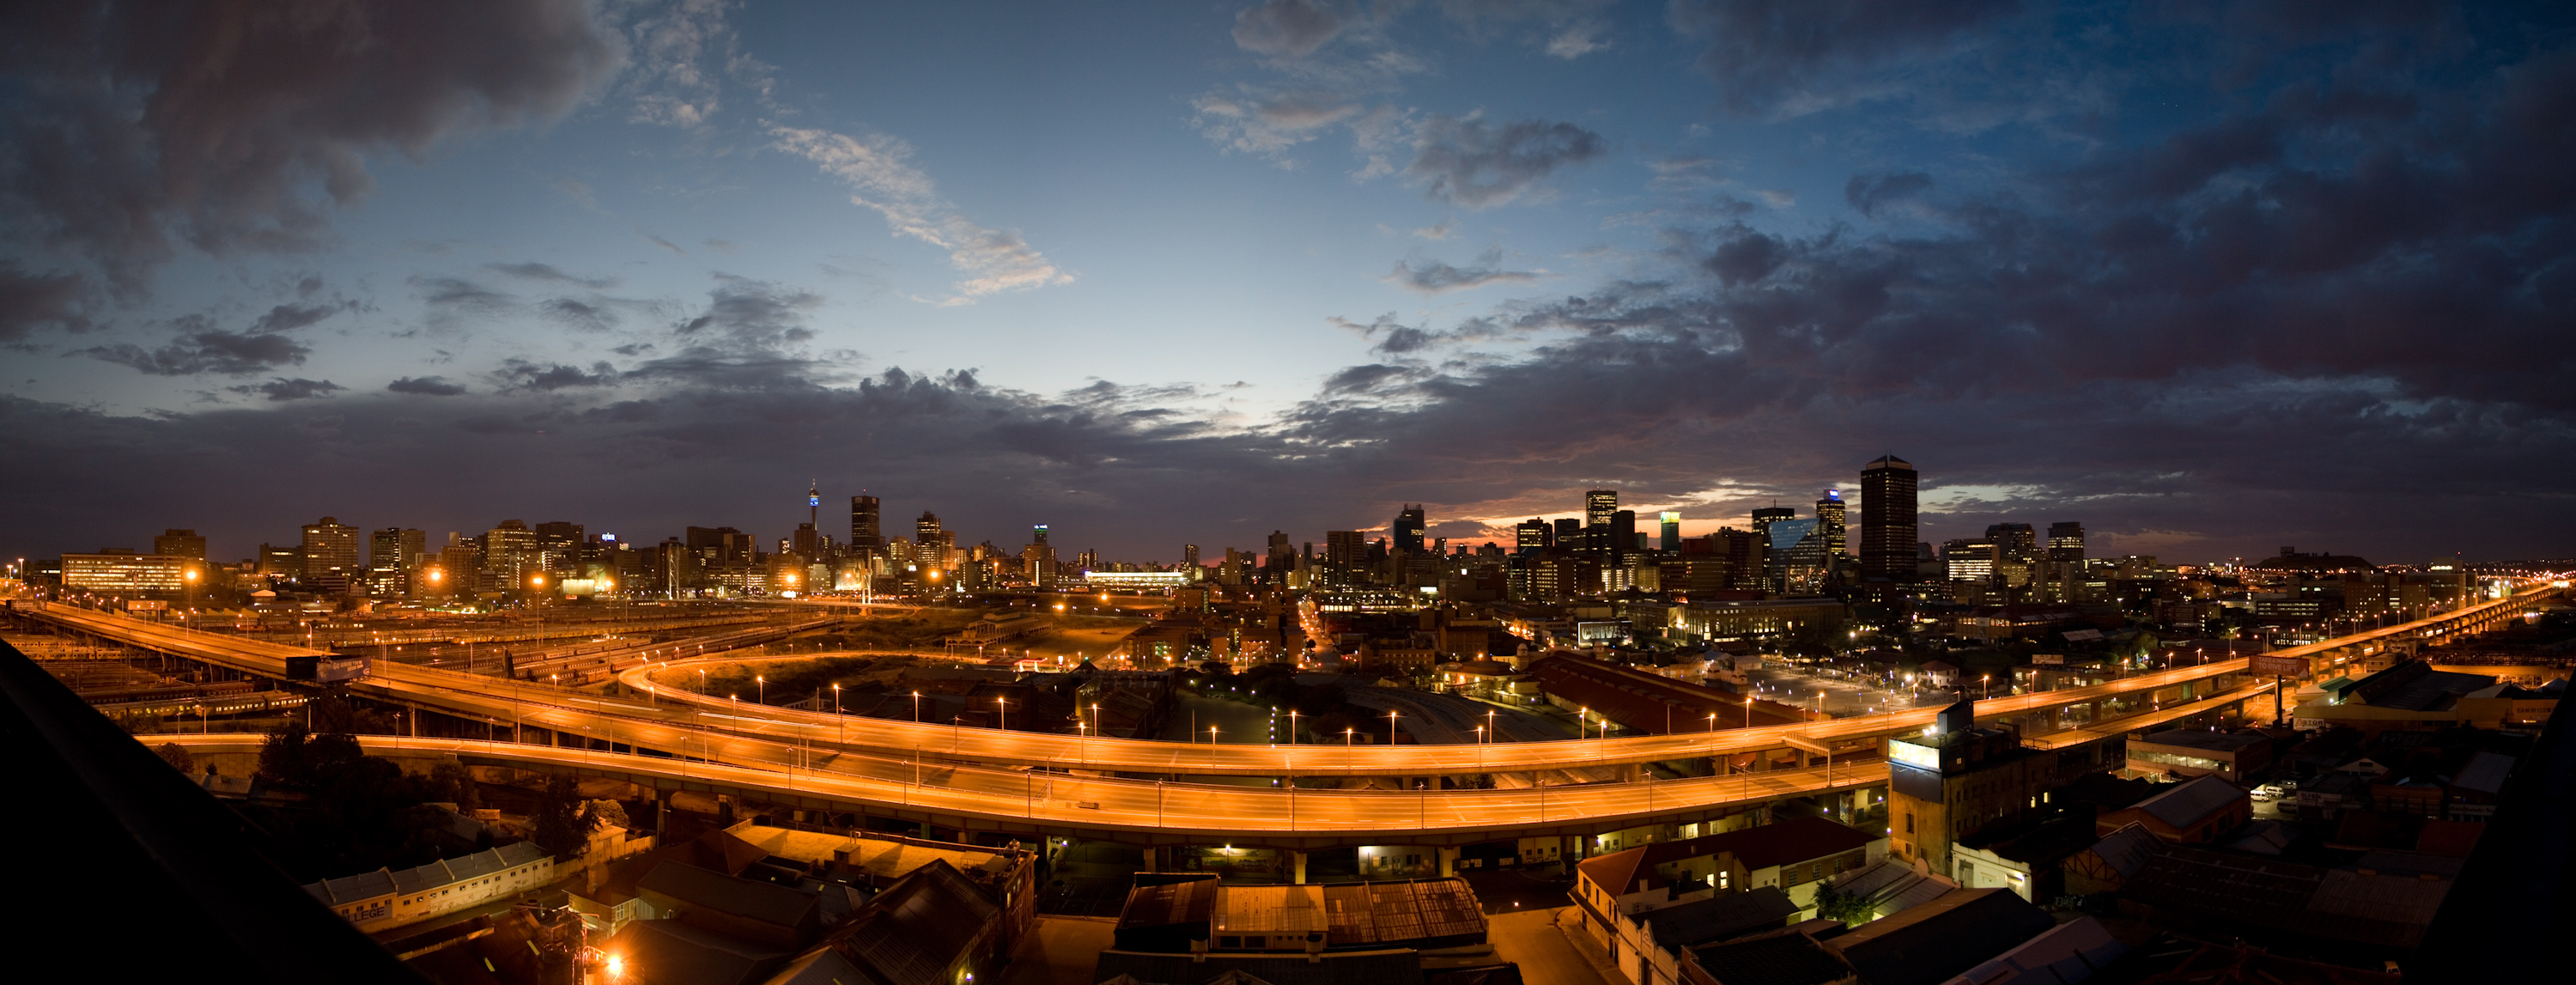 Jhb skyline with road at night 